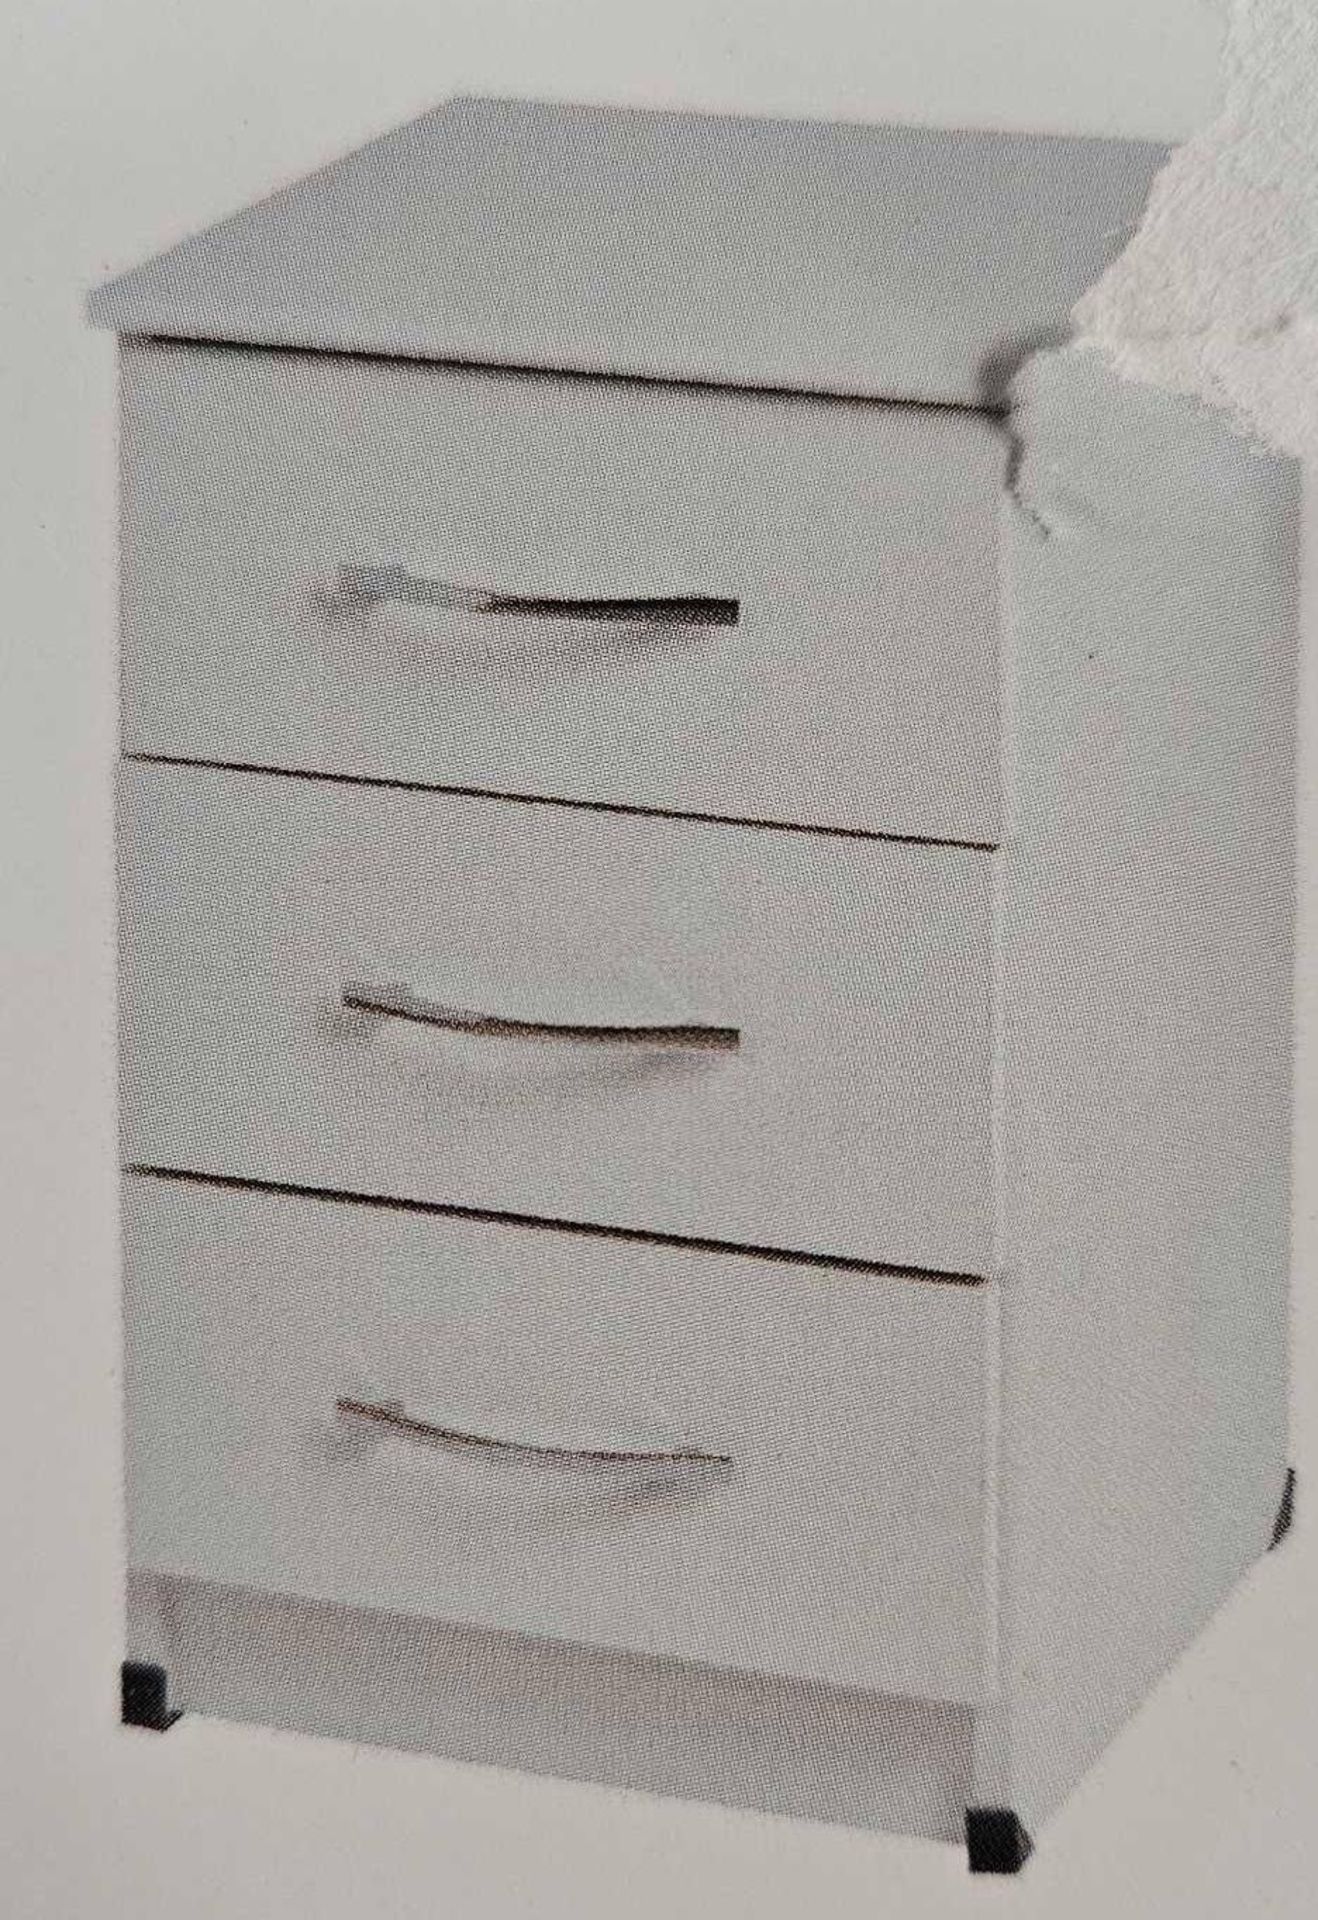 *BRAND NEW* 3 drawer bedside cabinet grey and white.